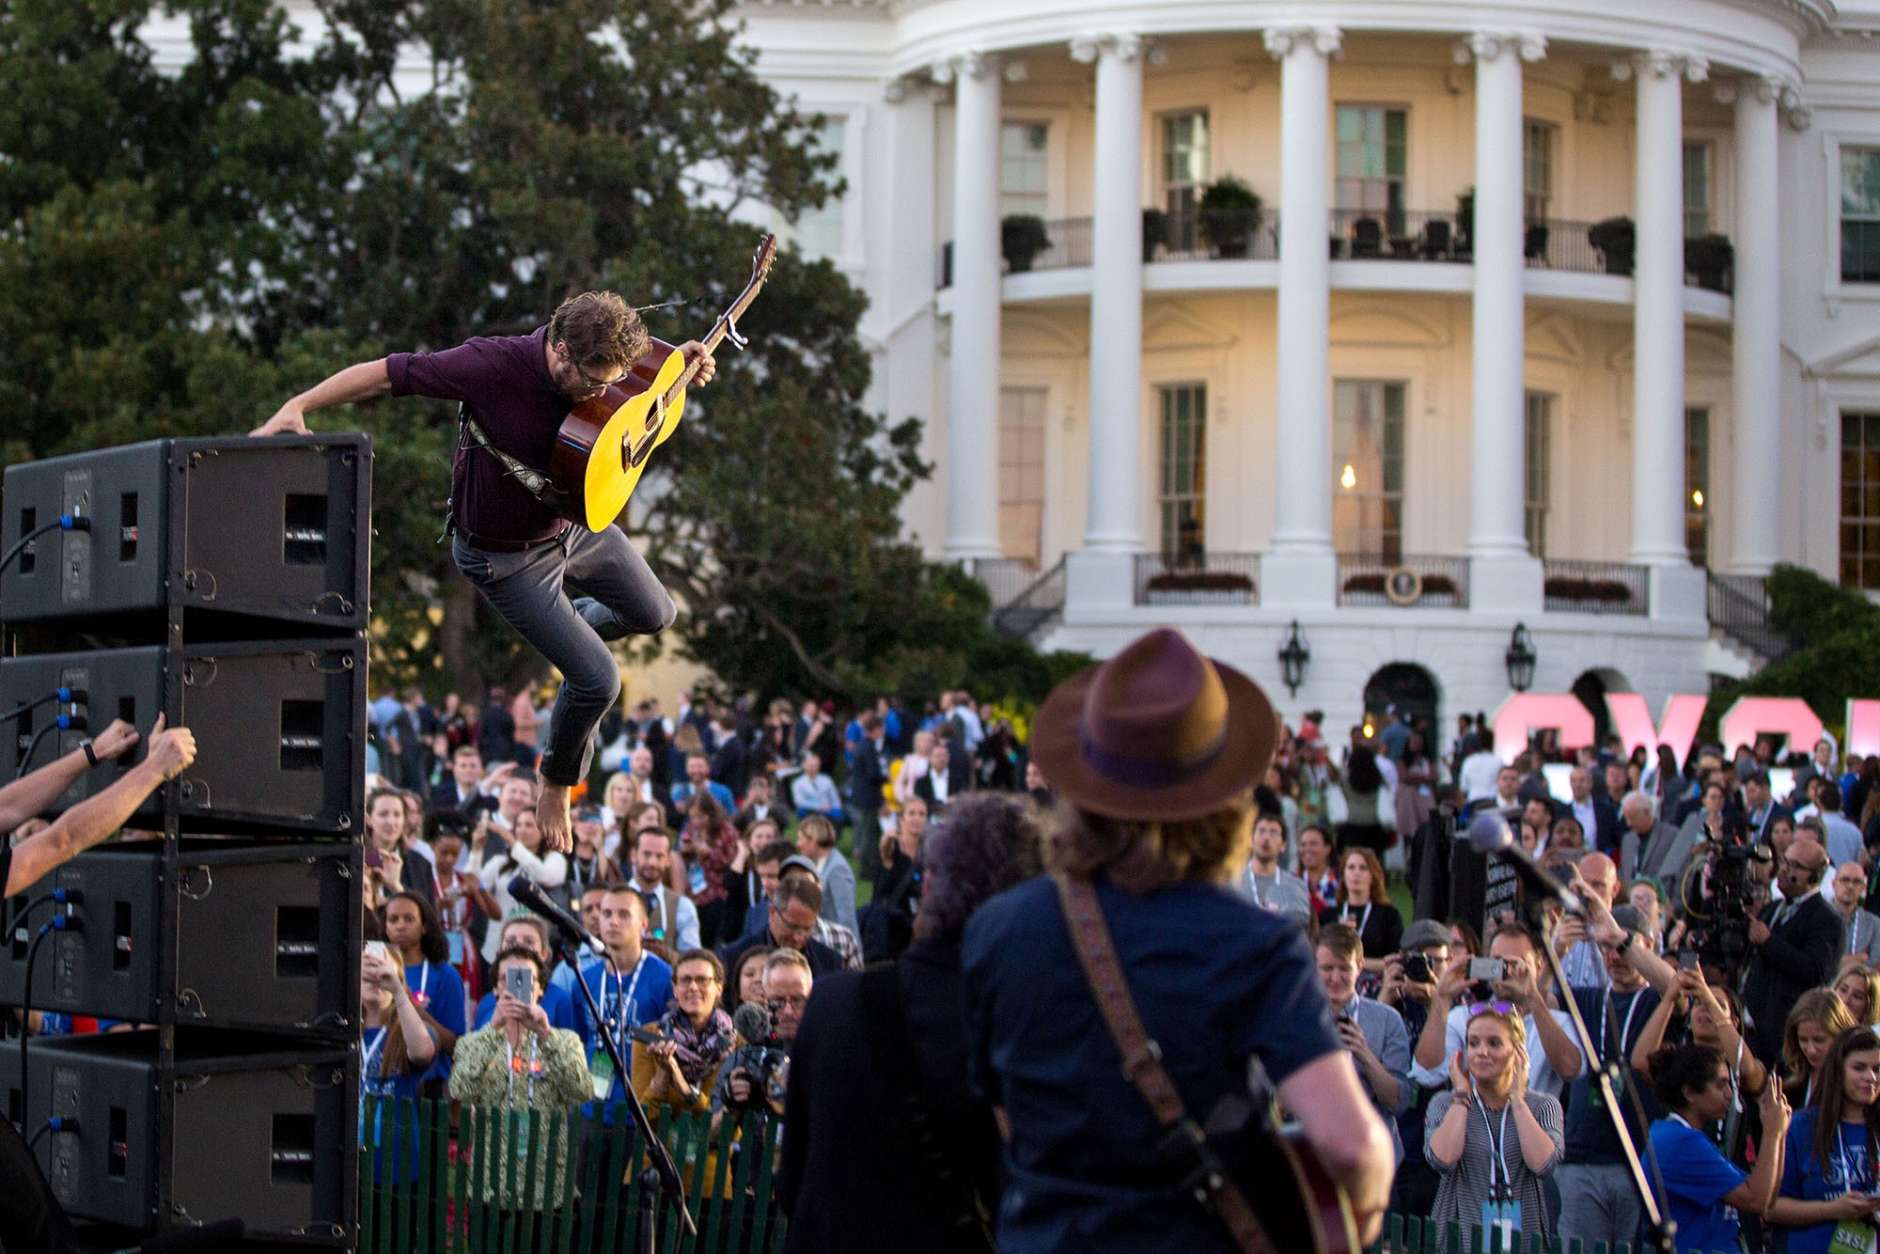 Oct. 3, 2016
“I’m a big fan of The Lumineers but had never seen them perform live. So I was excited when I heard they were the headliners during the South by South Lawn (SXSL) event at the White House. Before their performance, I asked them if I could go on the stage so I could line up the White House in the background. What I didn’t expect was guitarist Stelth Ulvang to jump on top of one of the speakers during their set. And though my composition wasn’t perfect, I was able to catch the moment when he leapt off.” (Official White House Photo by Pete Souza)